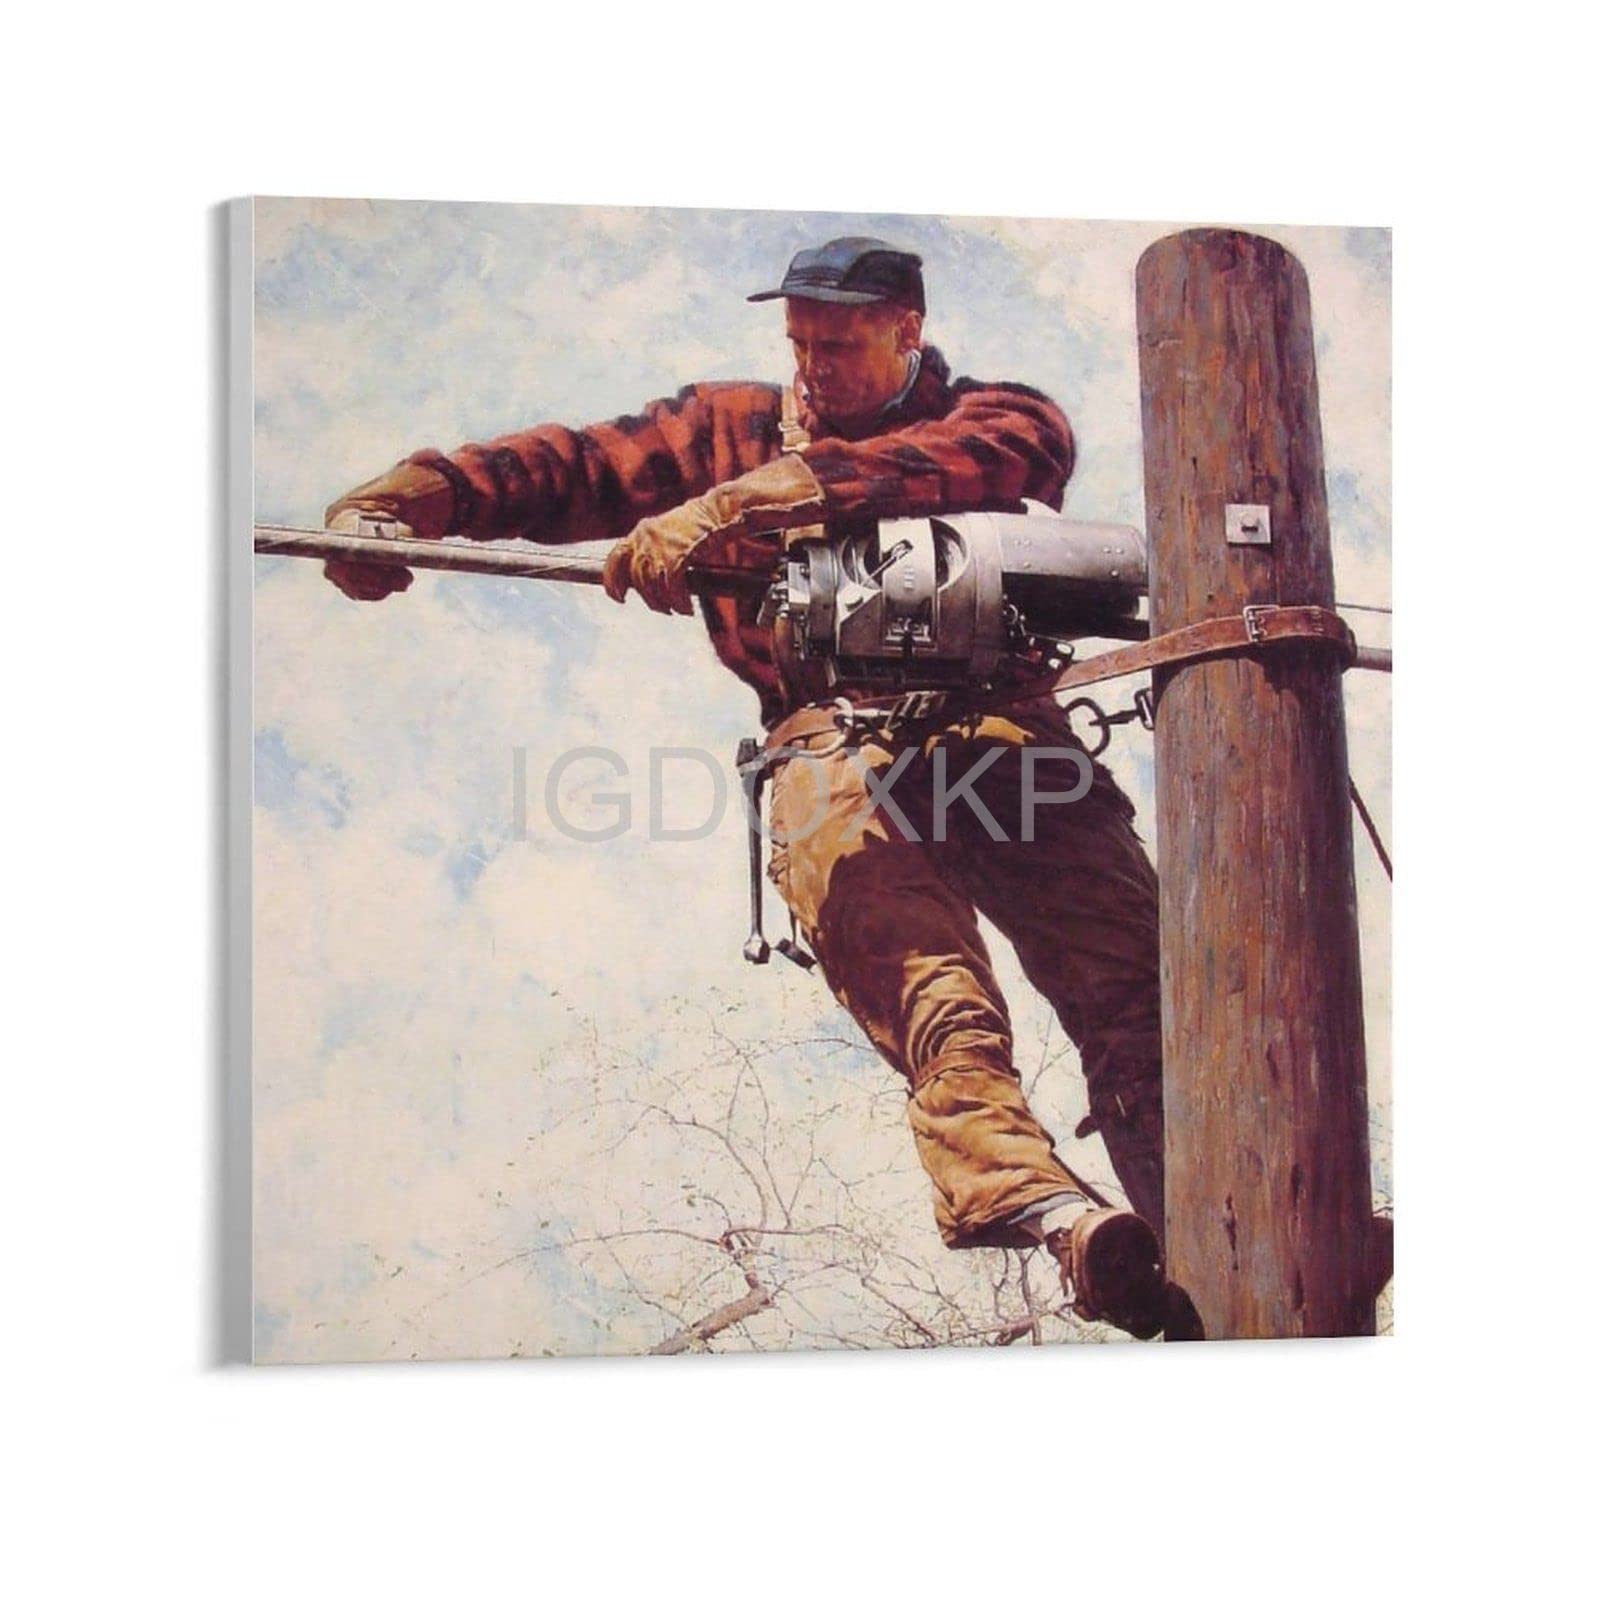 Umatr painter norman rockwell artwork the lineman painting art poster canvas painting wall art poster for bedroom living room decor xinchxcm unframe